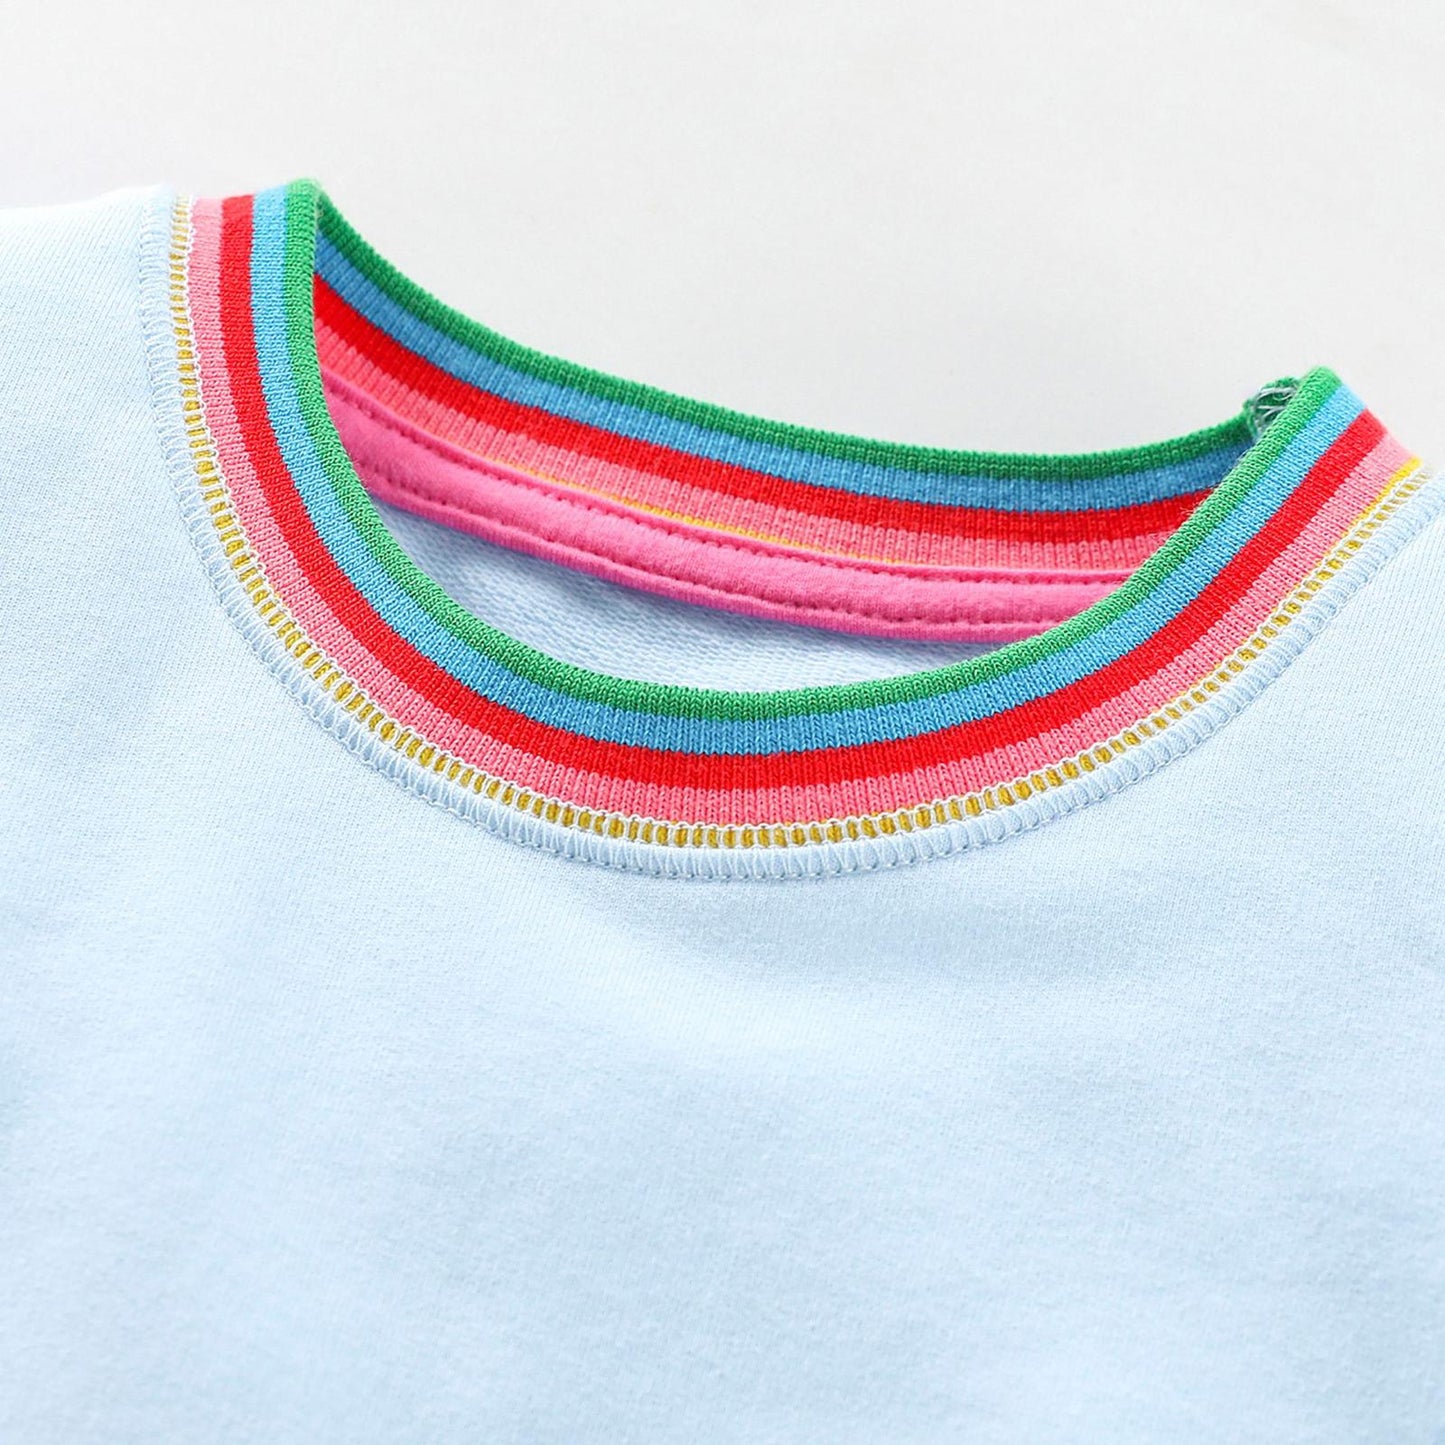 Colour pencils girl dress (Low in Stock/ 4 years old)